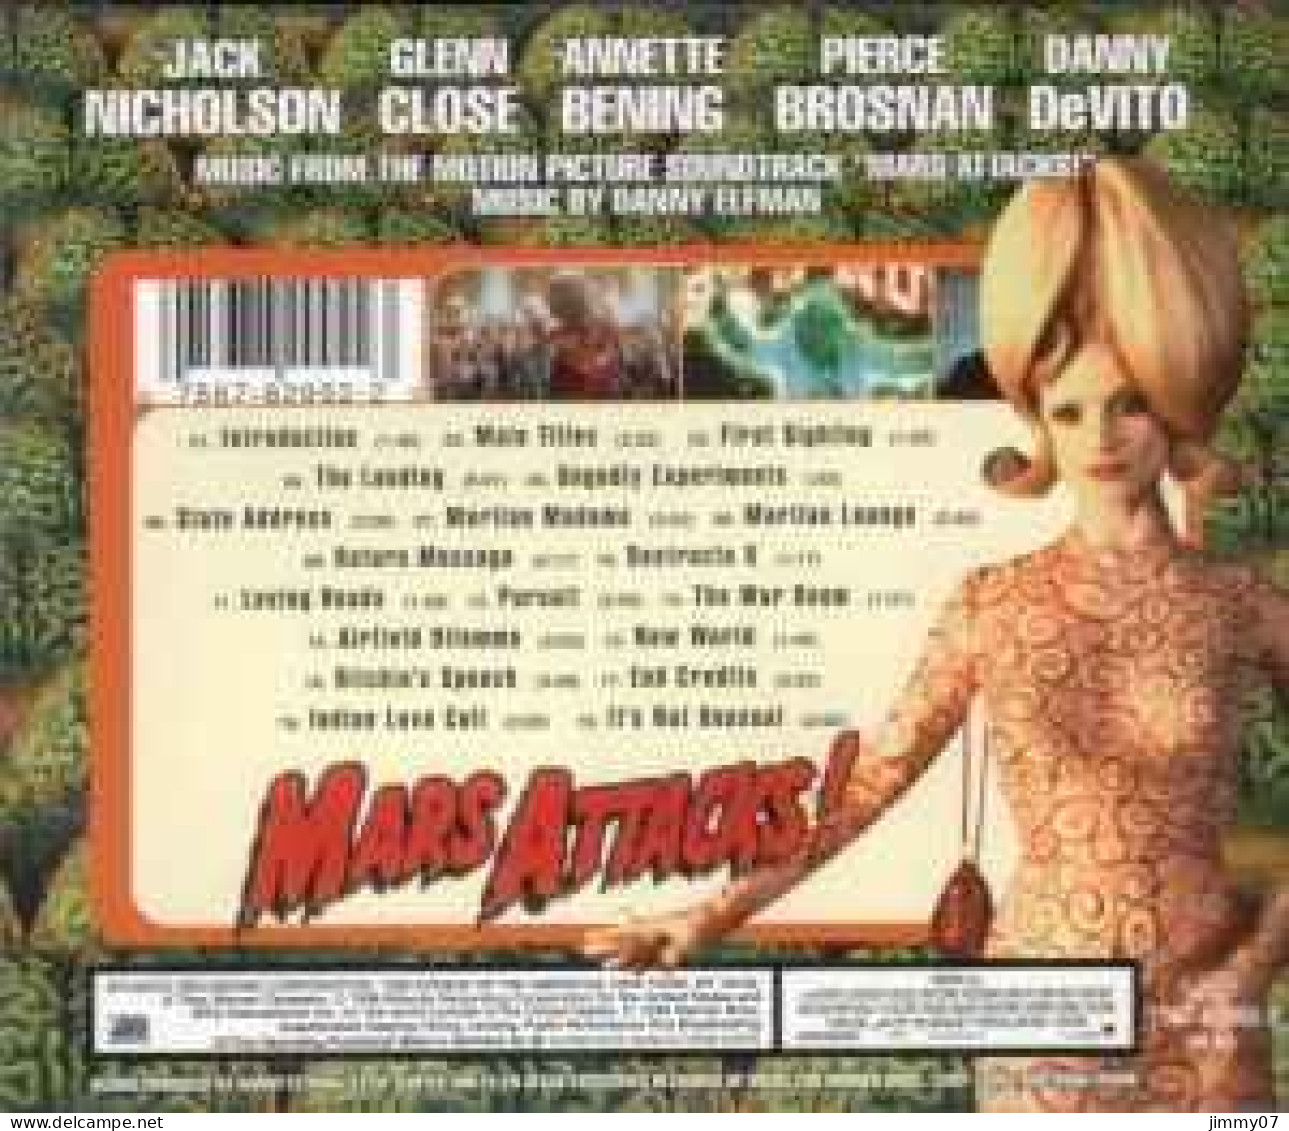 Danny Elfman - Mars Attacks! (Music From The Motion Picture Soundtrack) (CD, Album) - Soundtracks, Film Music